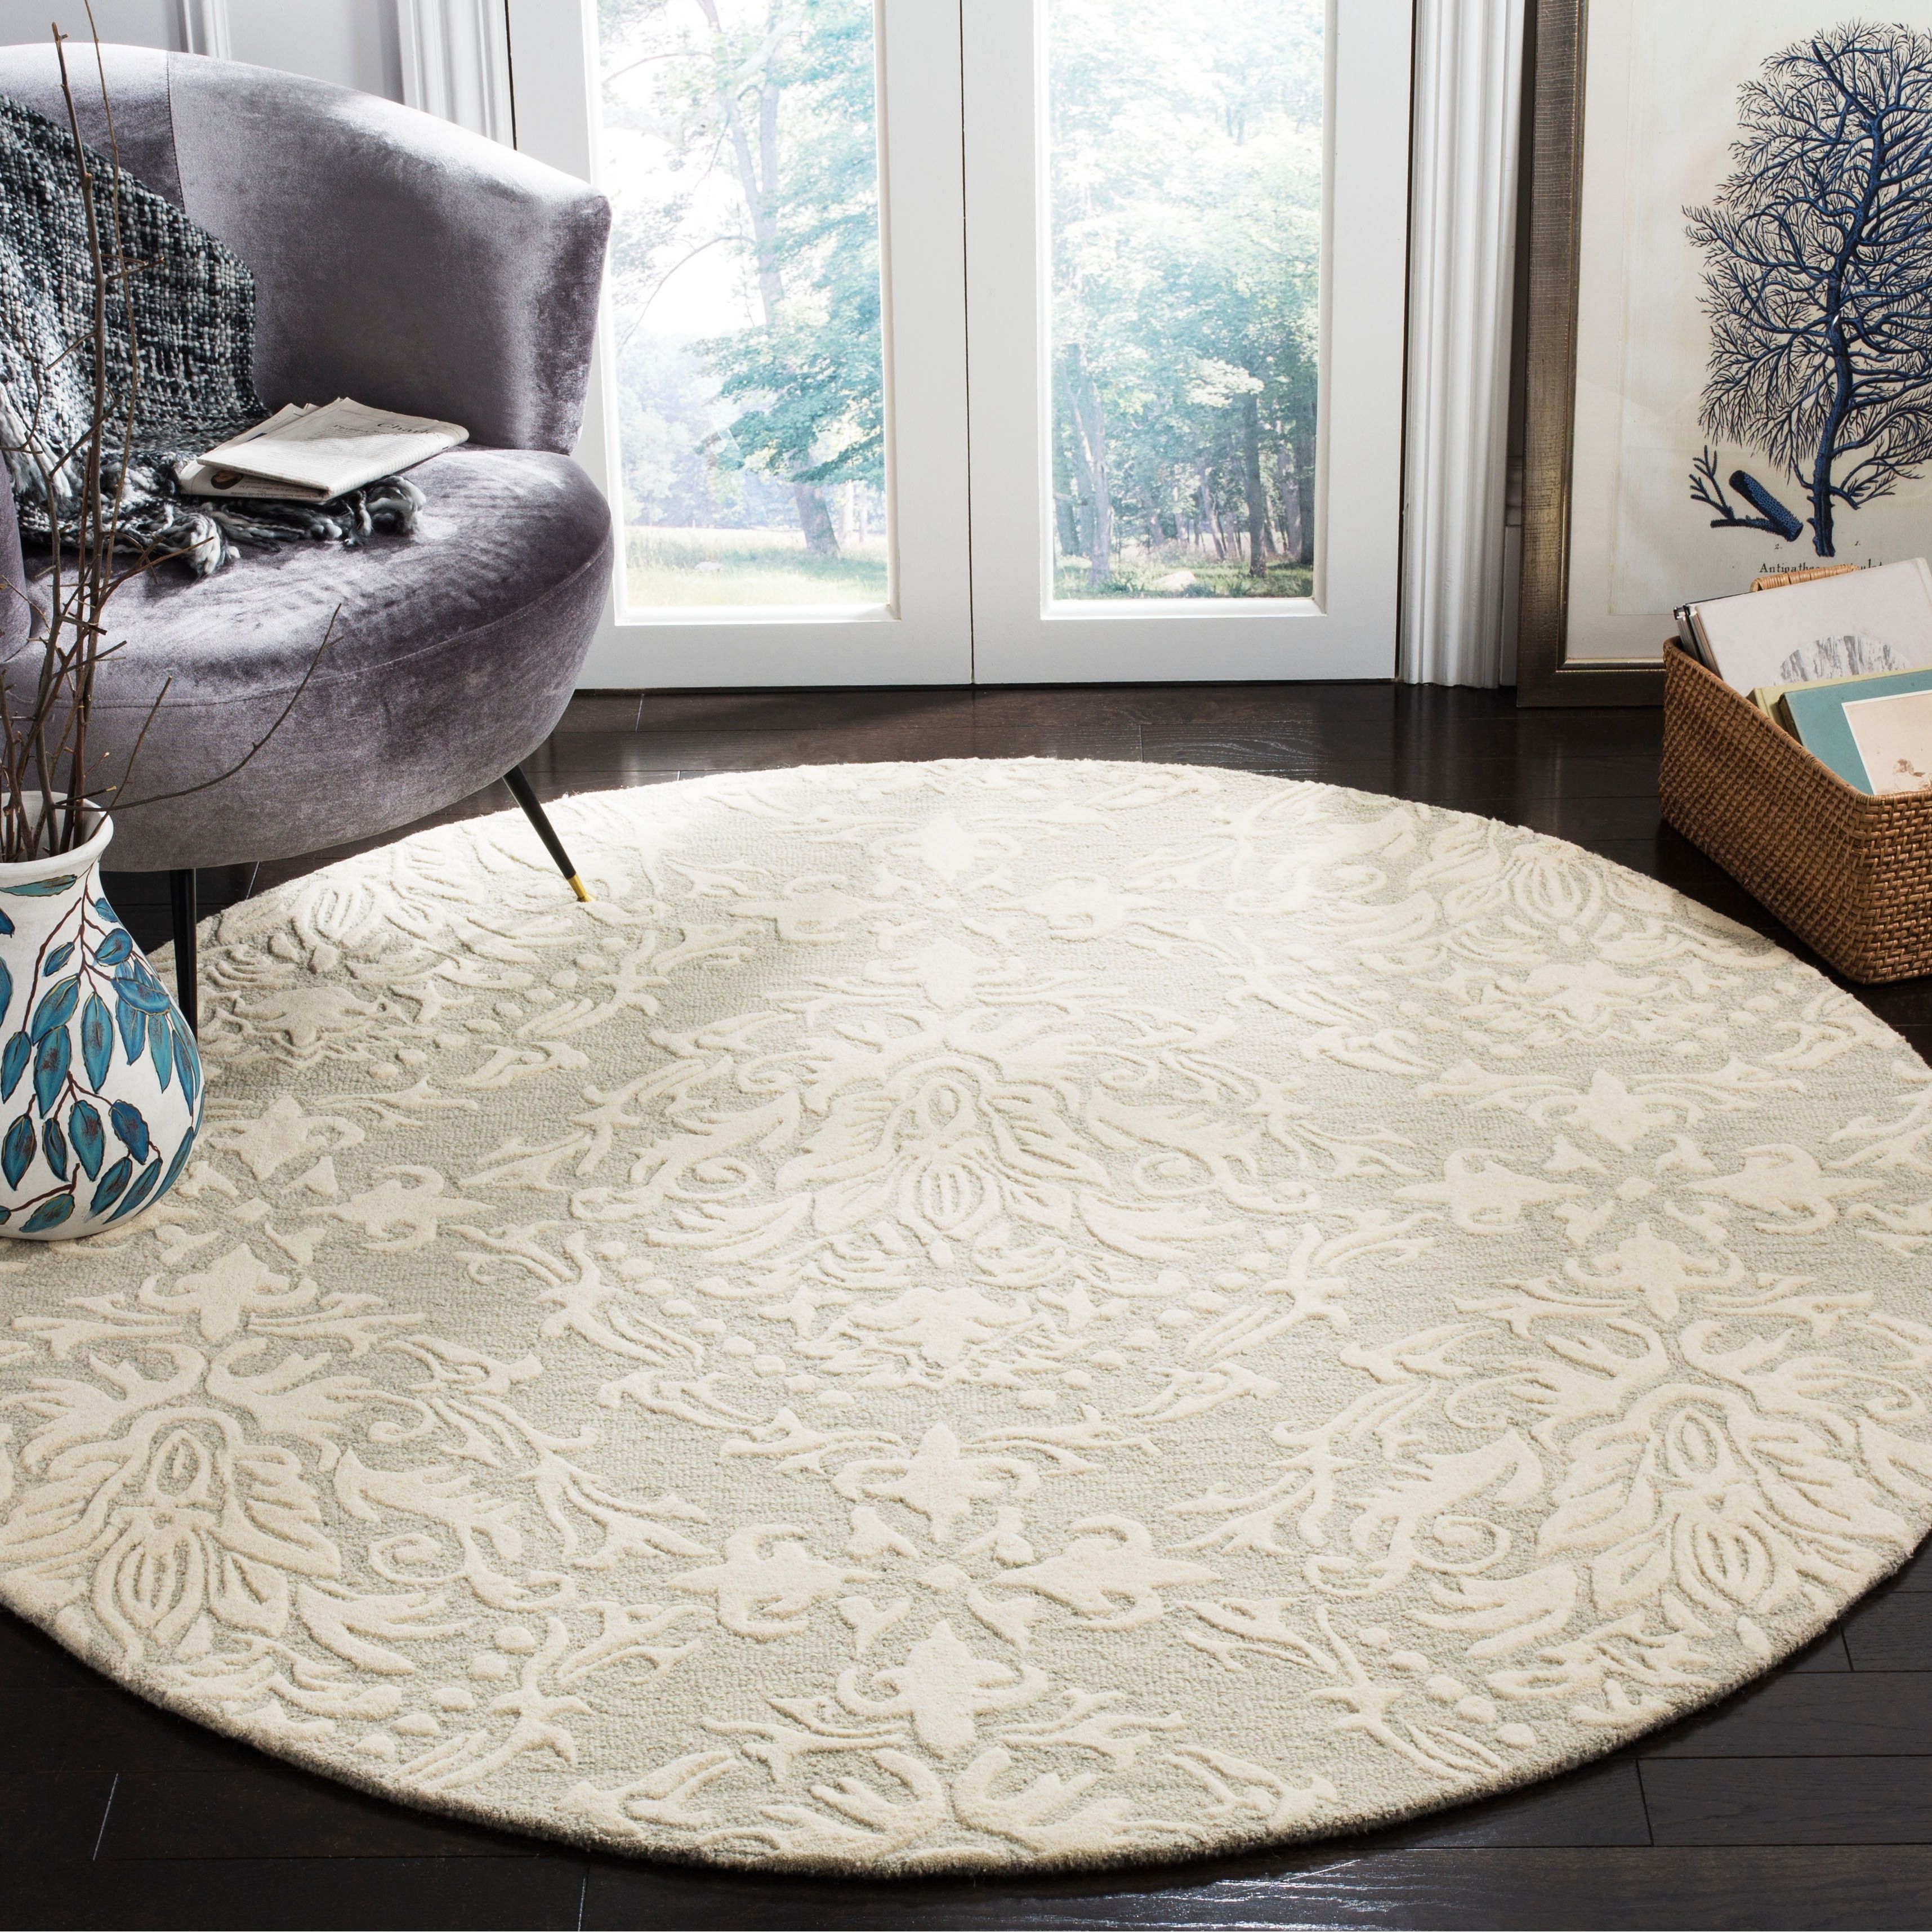 Safavieh Handmade Blossom Lollie Modern Floral Wool Rug – On Sale –  Overstock – 18778975 With Regard To Blossom Oval Rugs (View 2 of 15)